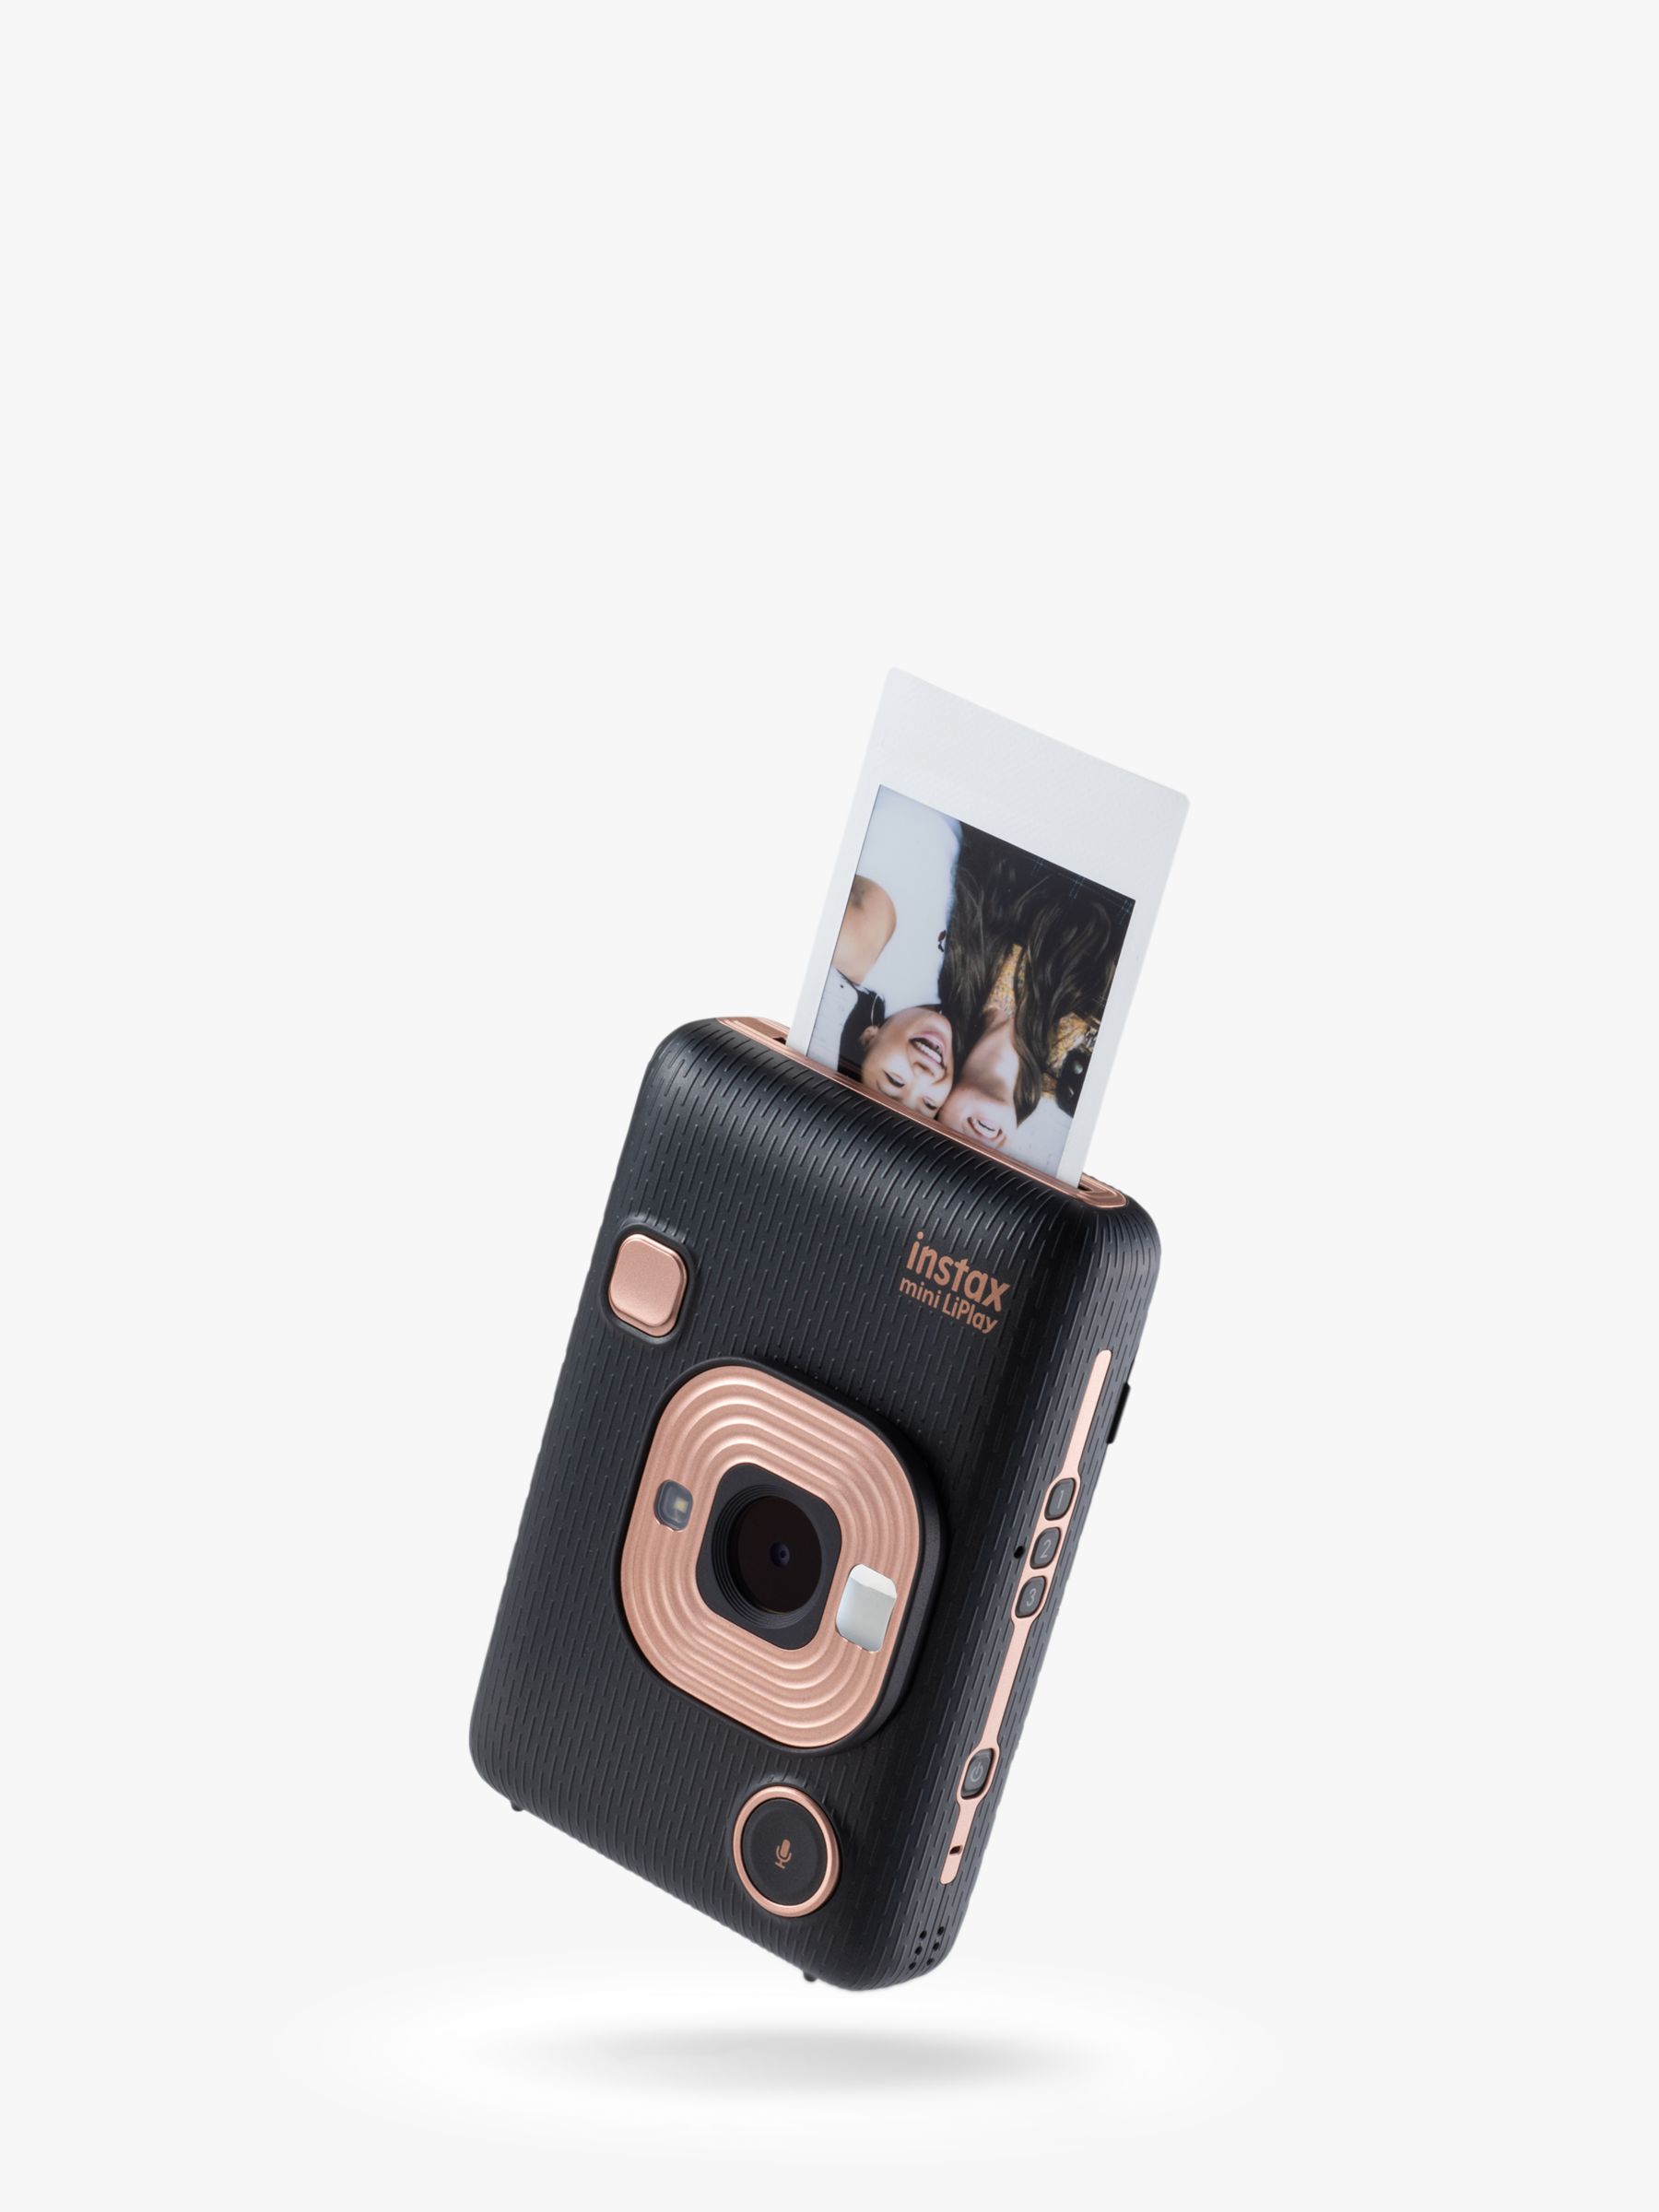 Image of Fujifilm Instax Mini LiPlay Hybrid Instant Camera with 27 LCD Screen and Builtin Flash